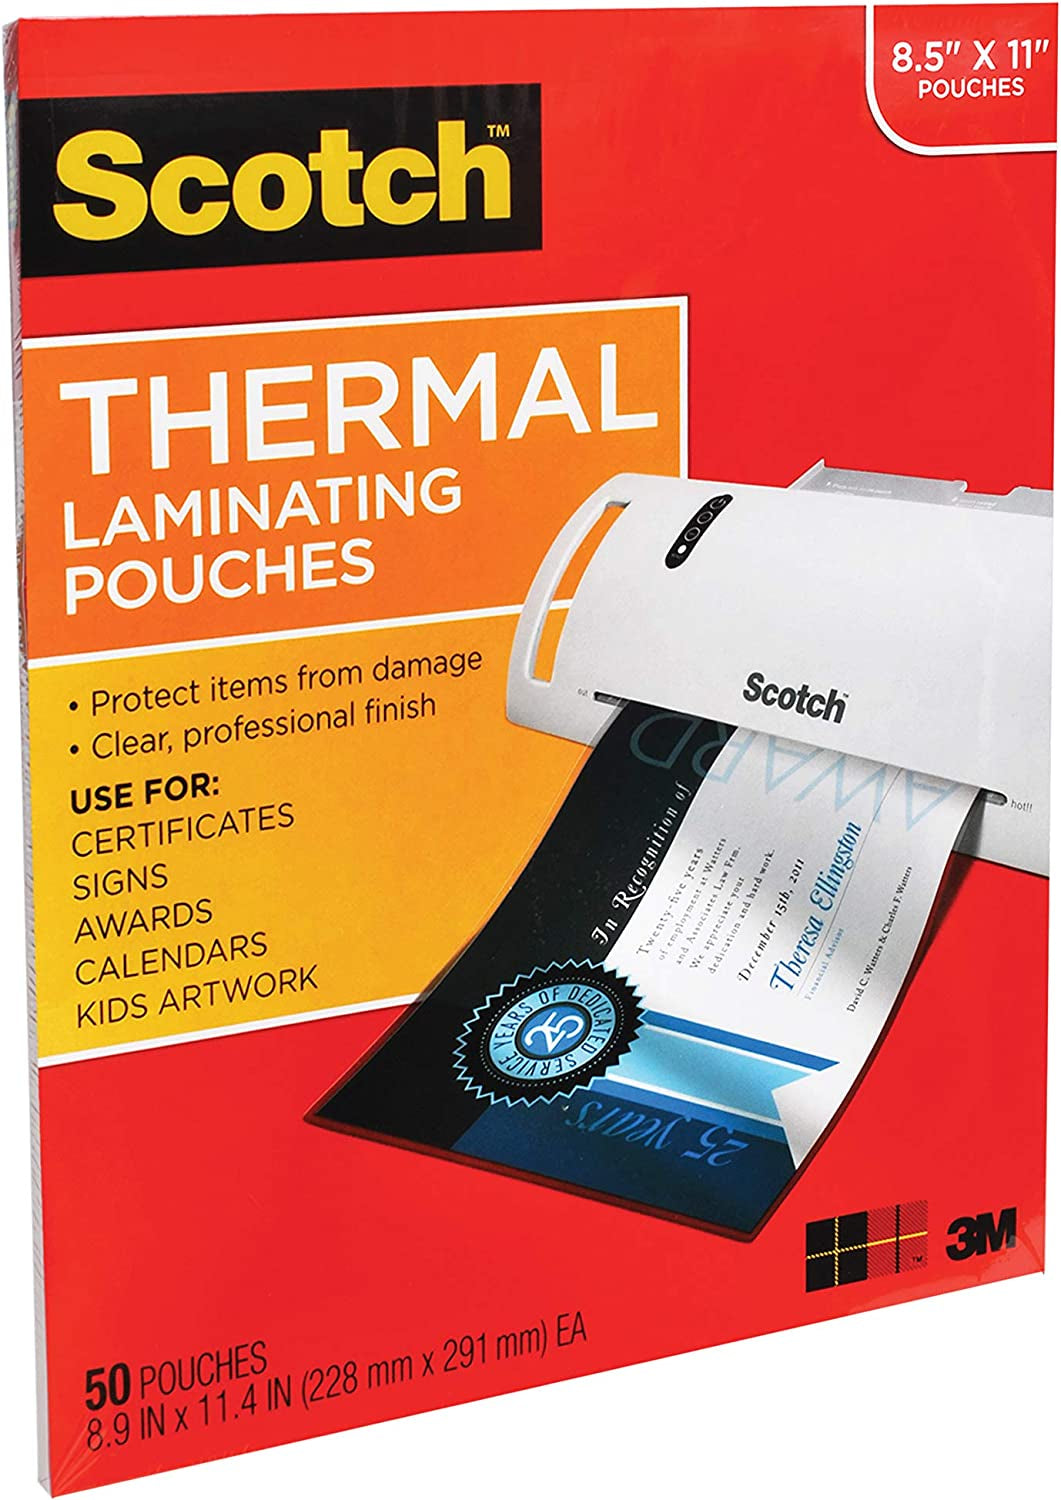 Thermal Laminating Pouches, 50 Pack Laminating Sheets, 3 Mil, 8.9 X 11.4 Inches, Education Supplies & Craft Supplies, for Use with Thermal Laminators, Letter Size Sheets (TP3854-50)